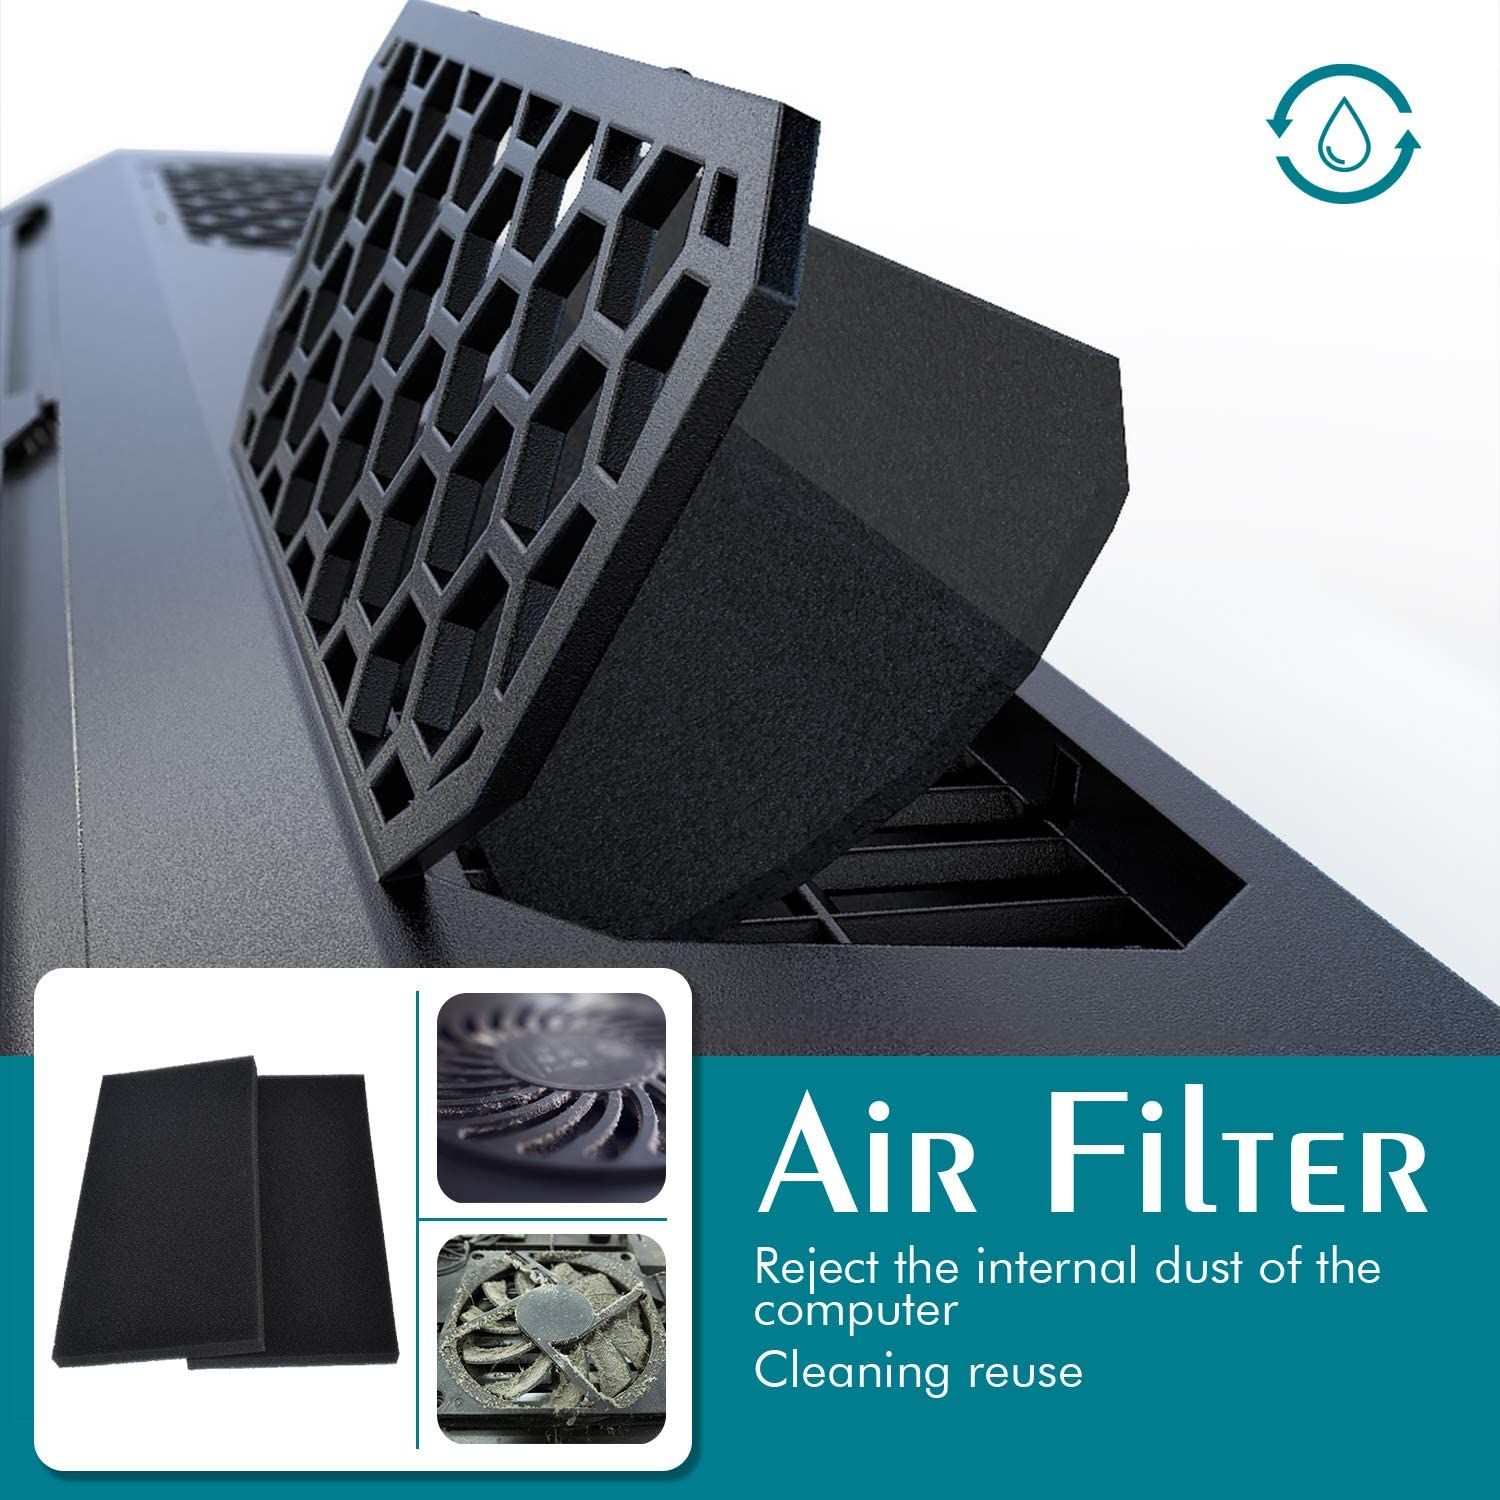 IETS GT300 Double Blower Laptop Cooling Pad air filters